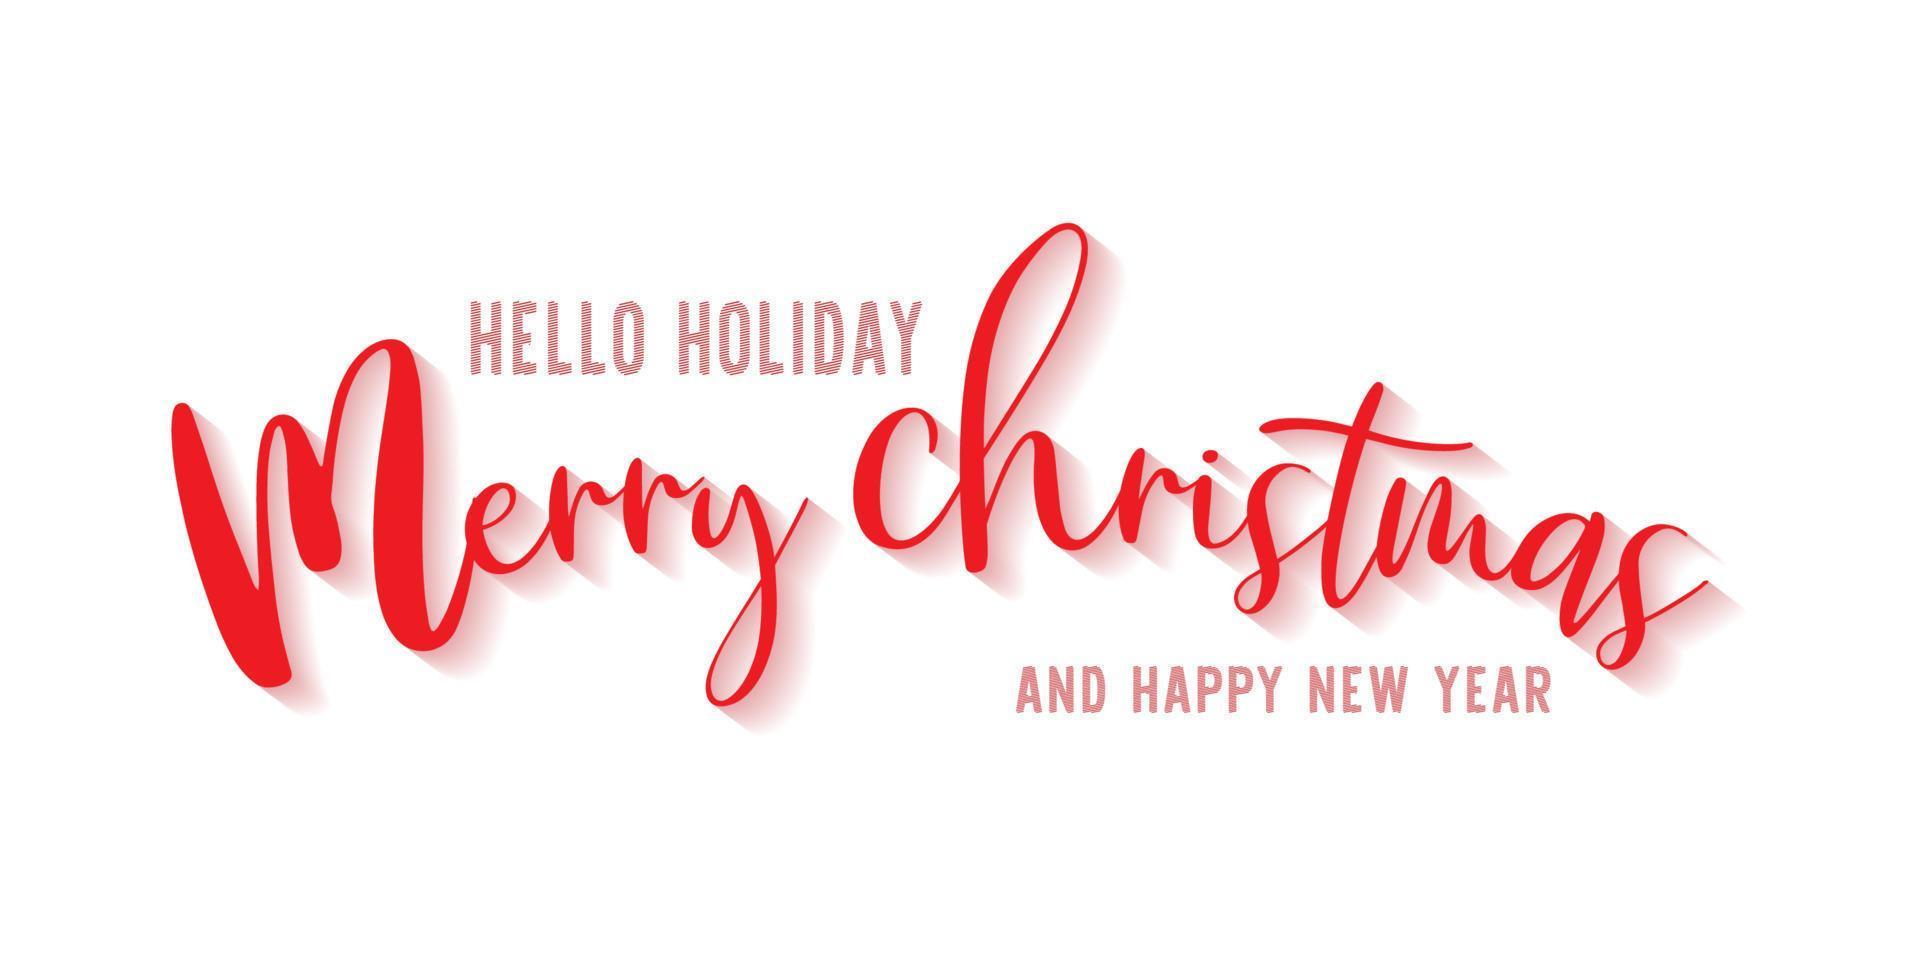 MERRY CHRISTMAS red text with shadow on white background. vector